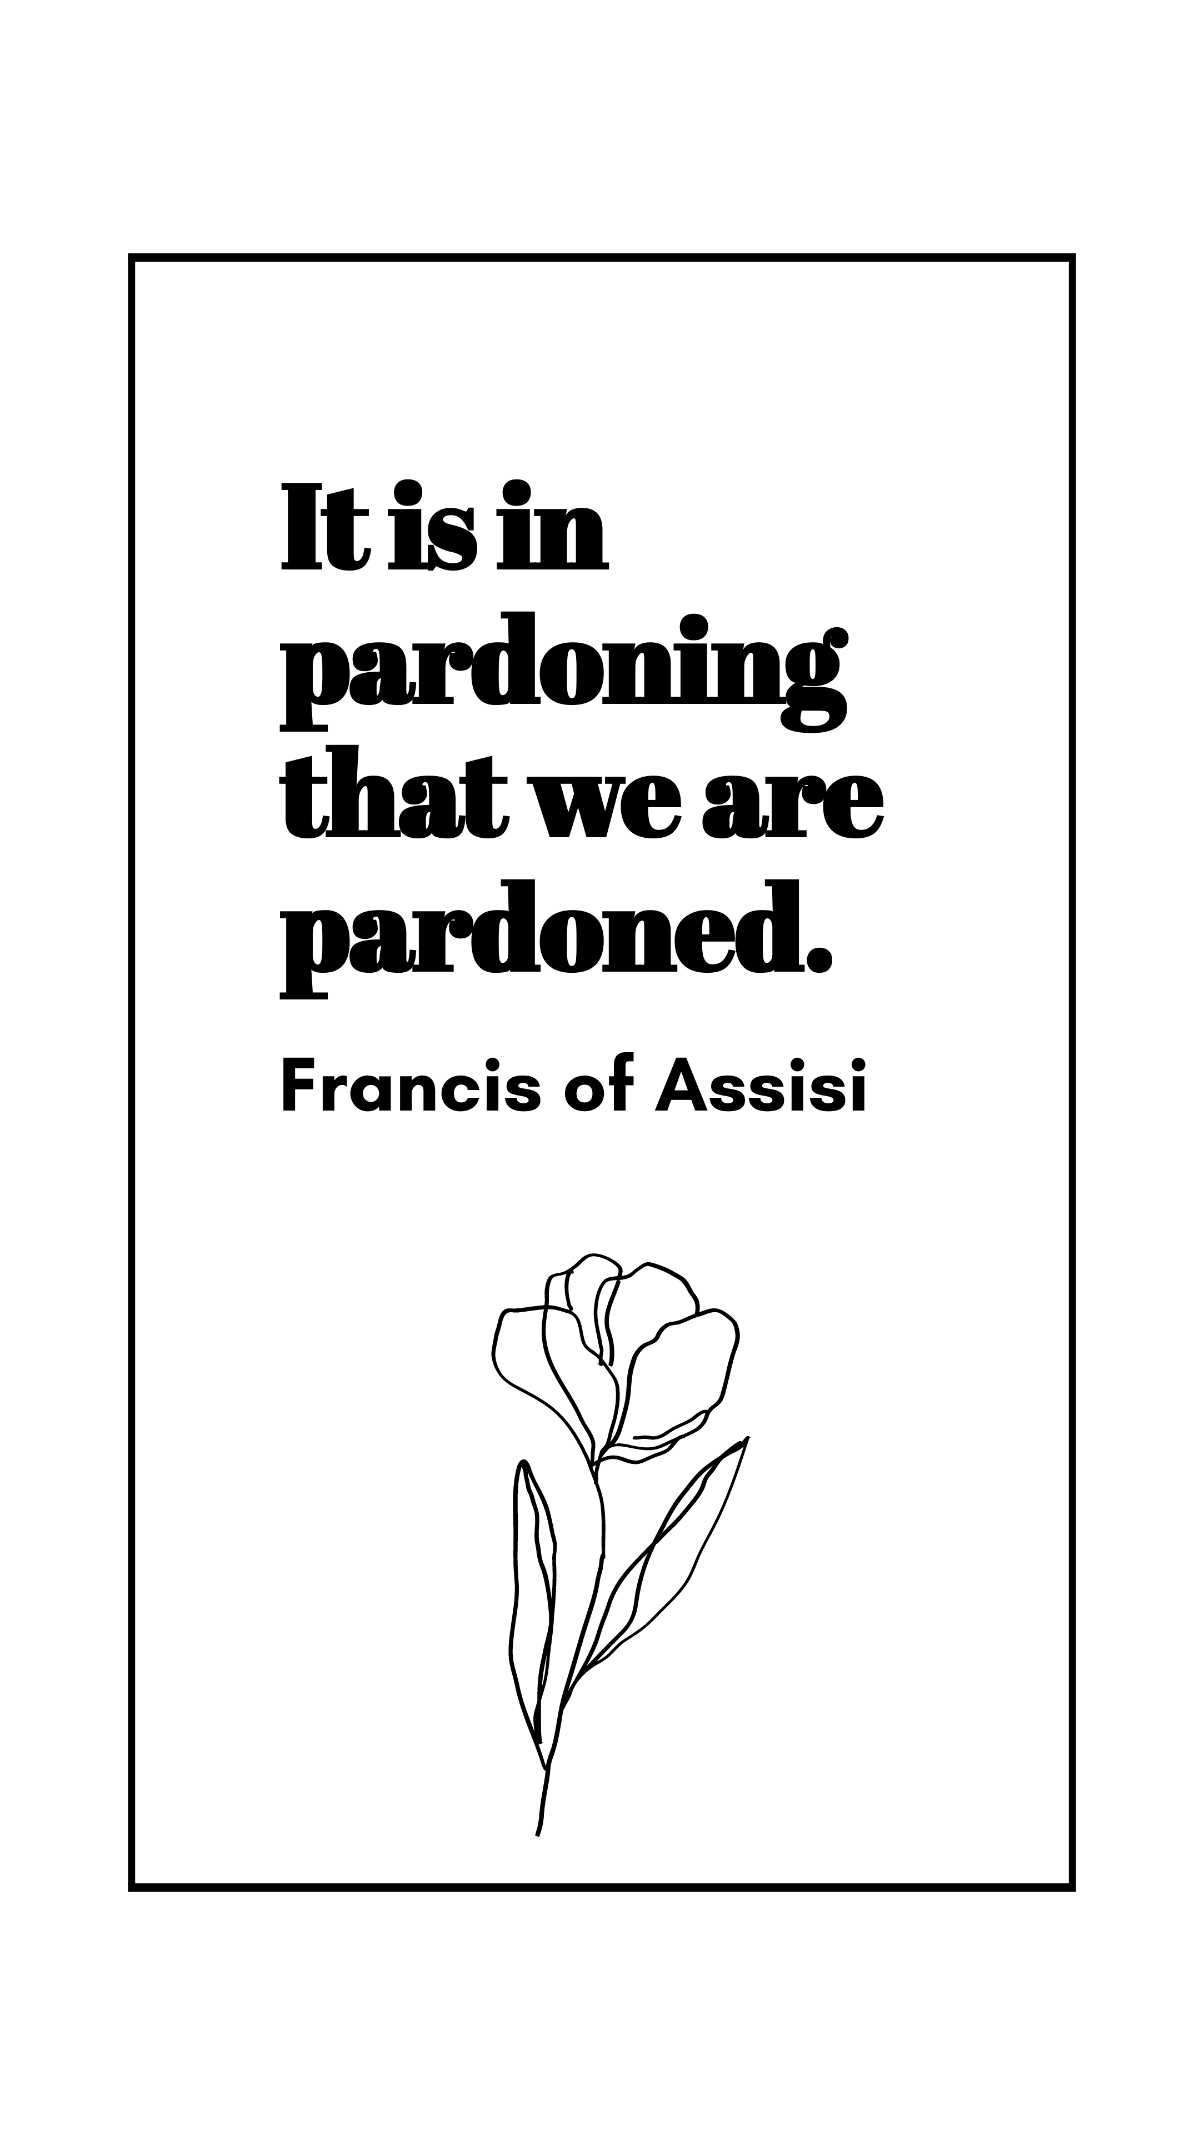 Francis of Assisi - It is in pardoning that we are pardoned.